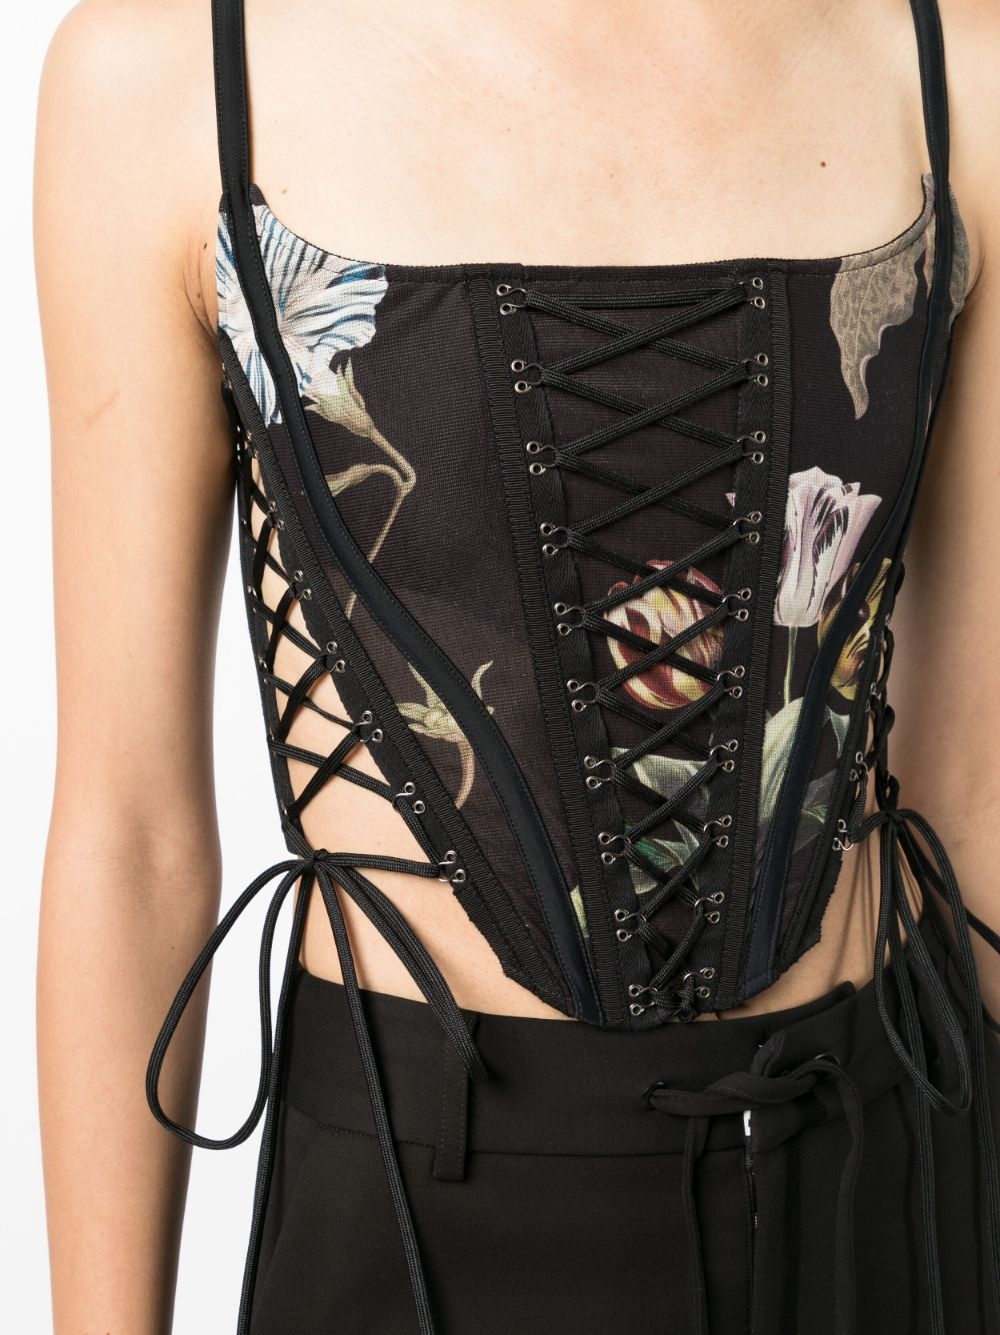 graphic-print lace-up corset - 5